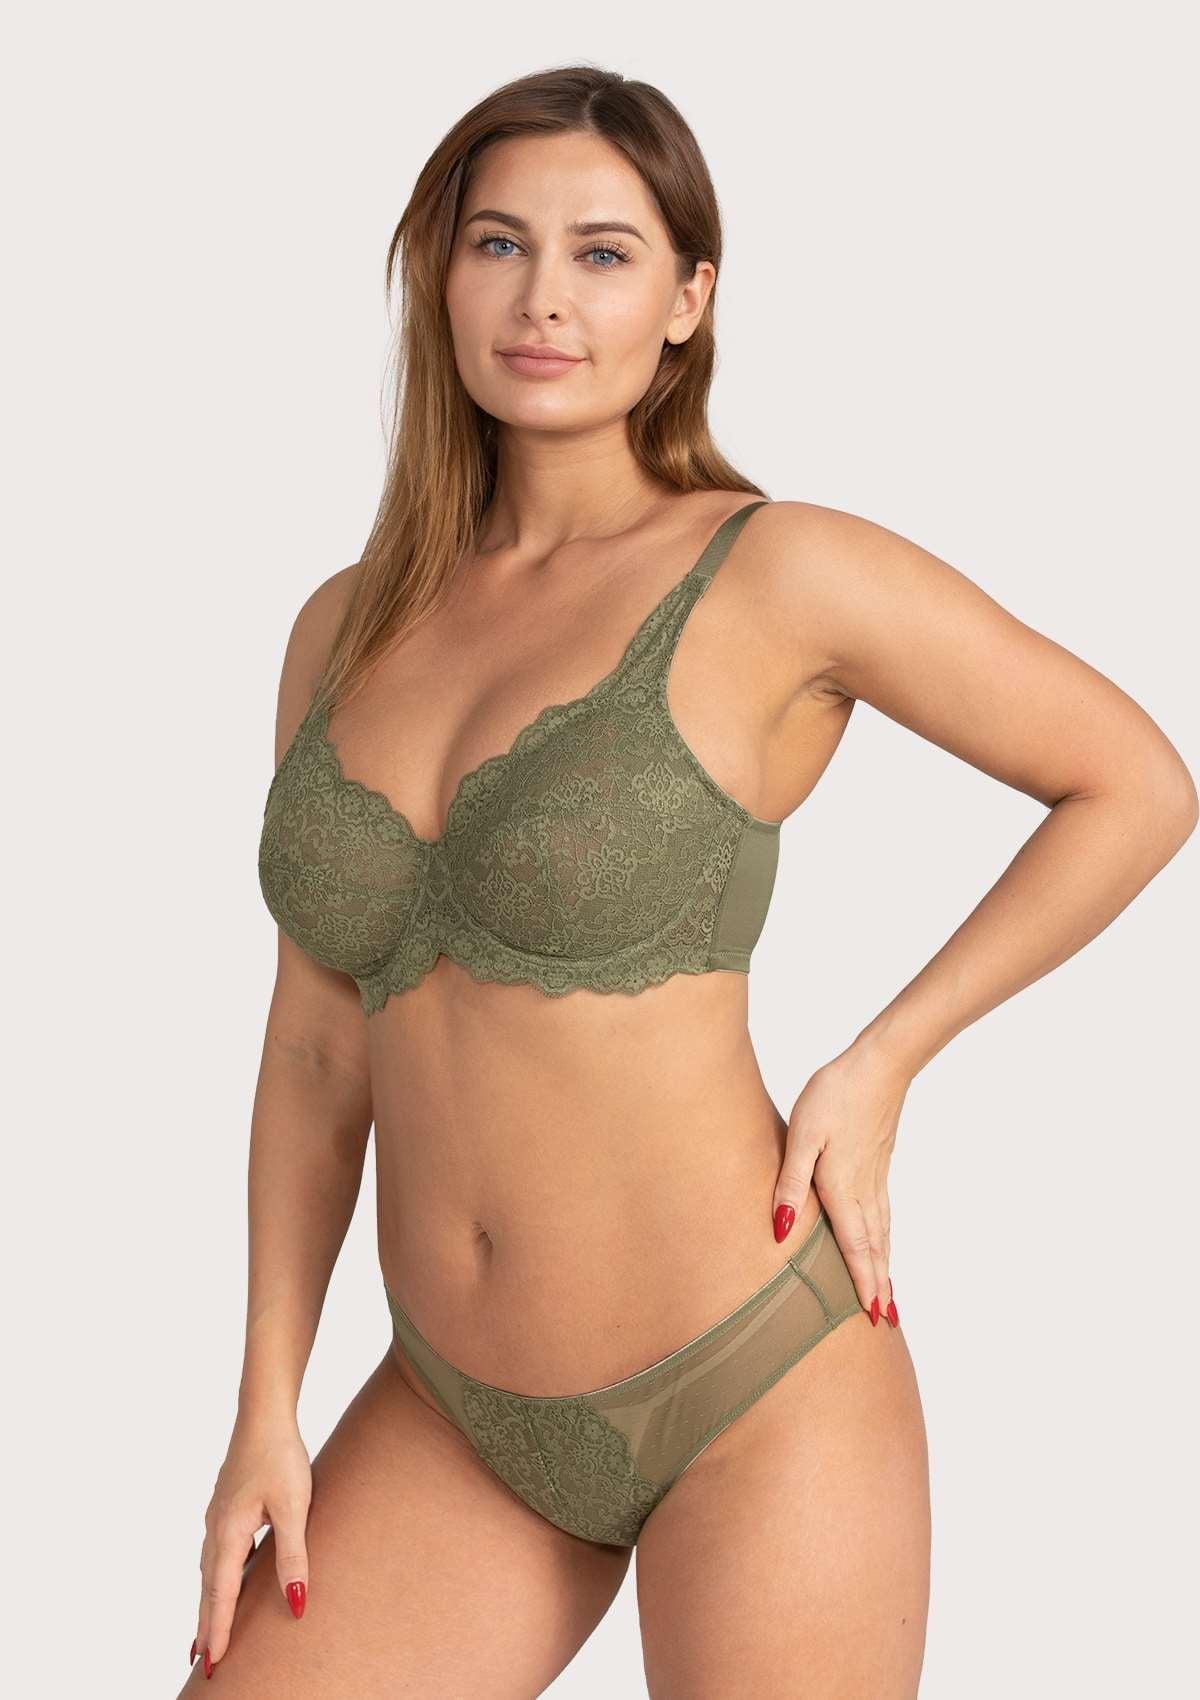 HSIA All-Over Floral Lace Unlined Bra: Minimizer Bra For Heavy Breasts - Dark Green / 34 / DDD/F